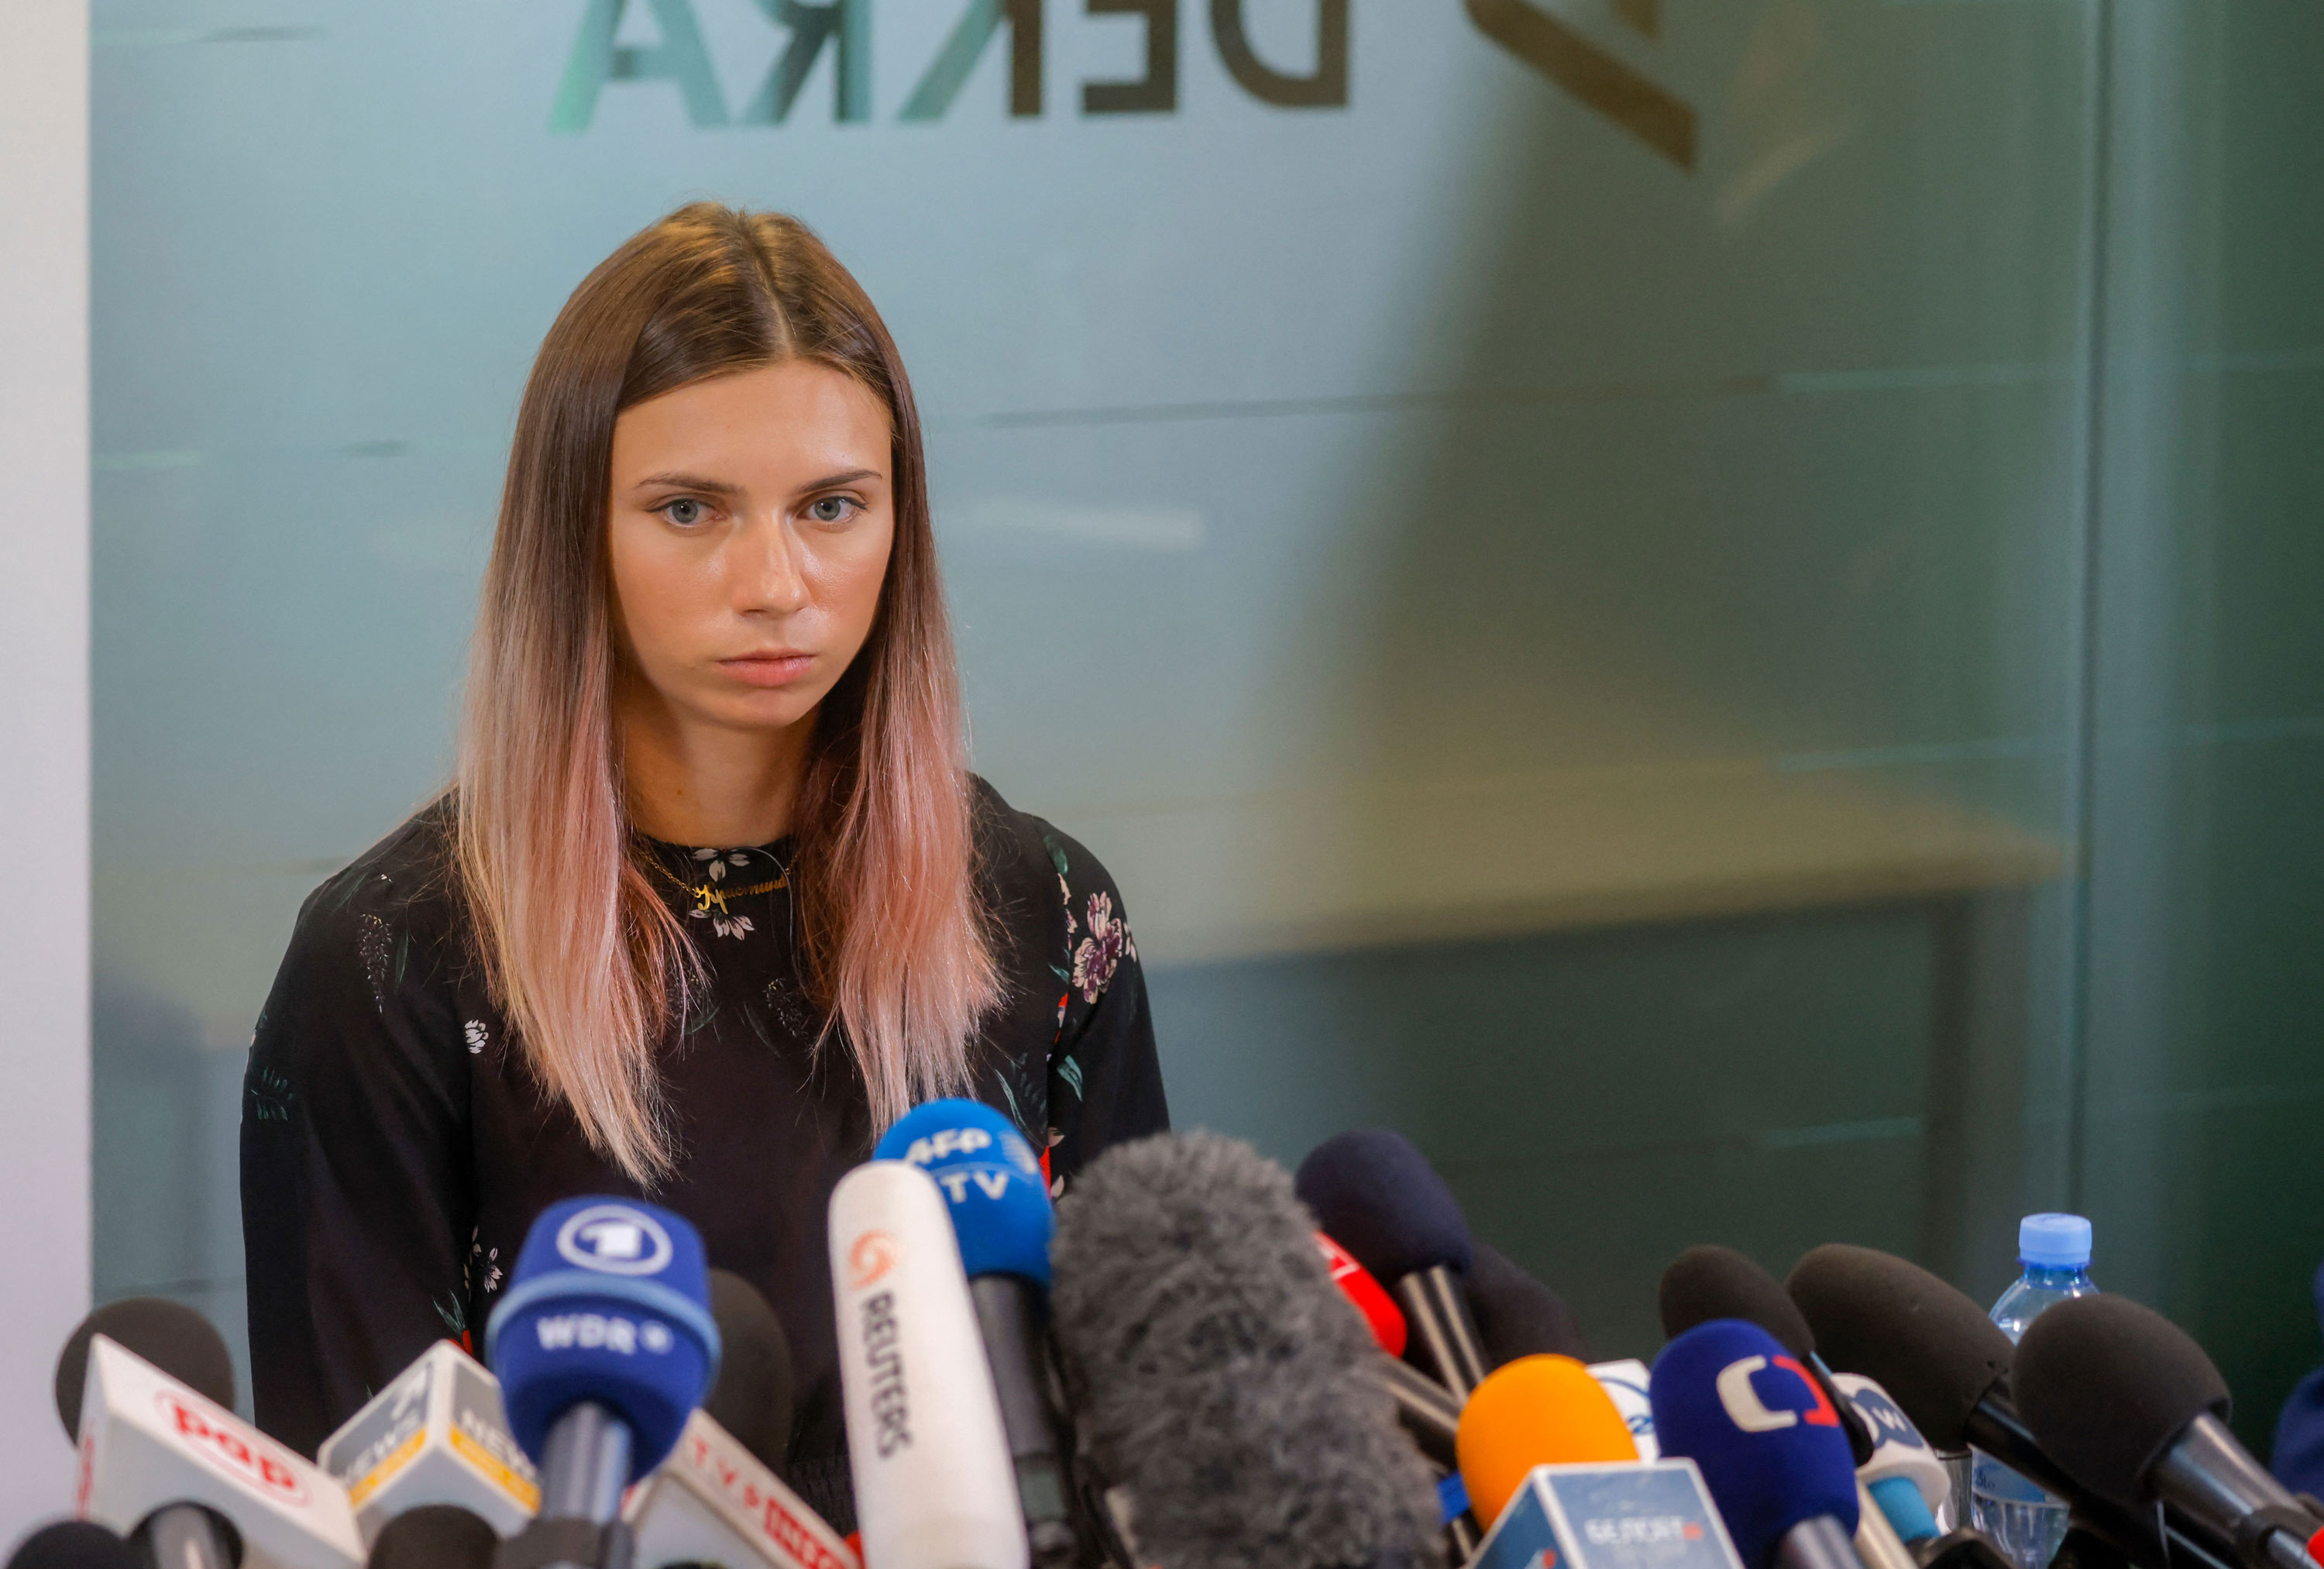 Belarusian Olympic athlete Kristina Timanovskaya addresses a press conference on August 5 in Warsaw, Poland. 